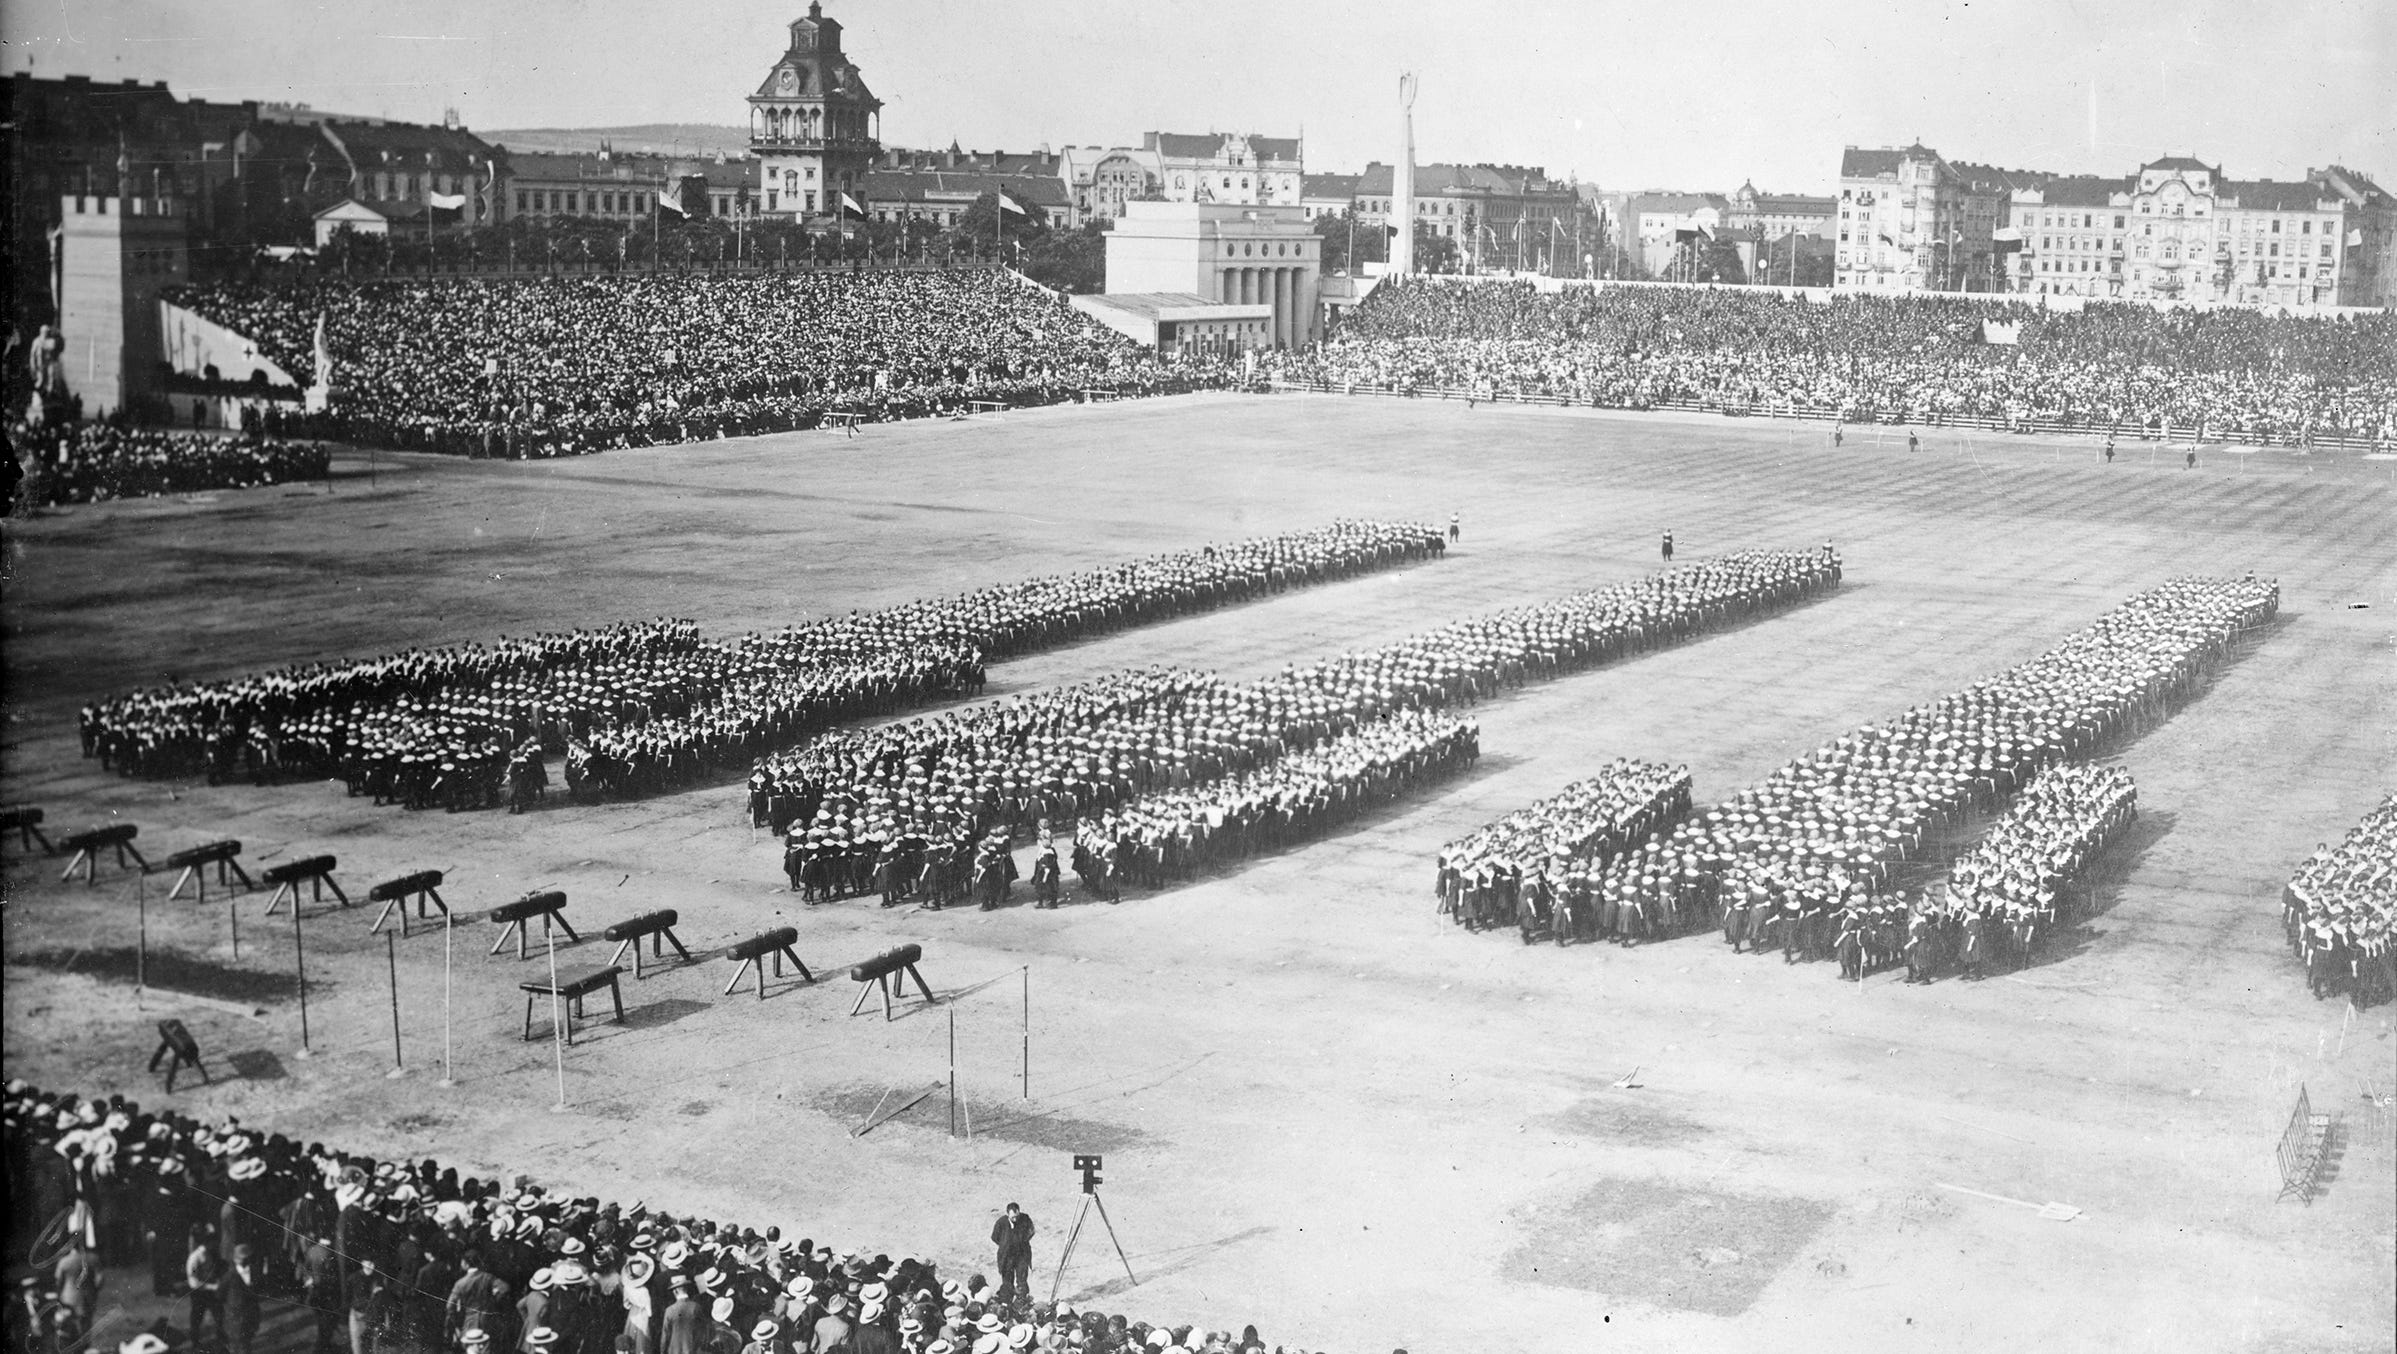 Ideas about exercise were imported from Europe.This 1912 exhibition by a European exercise and health organization called the Sokols shows young women standing in formation, probably during the Sokol Slet (gymnastic festival) held in Prague.  The Sokols Detroit exercise club was formed by immigrants from a variety of Central European countries.